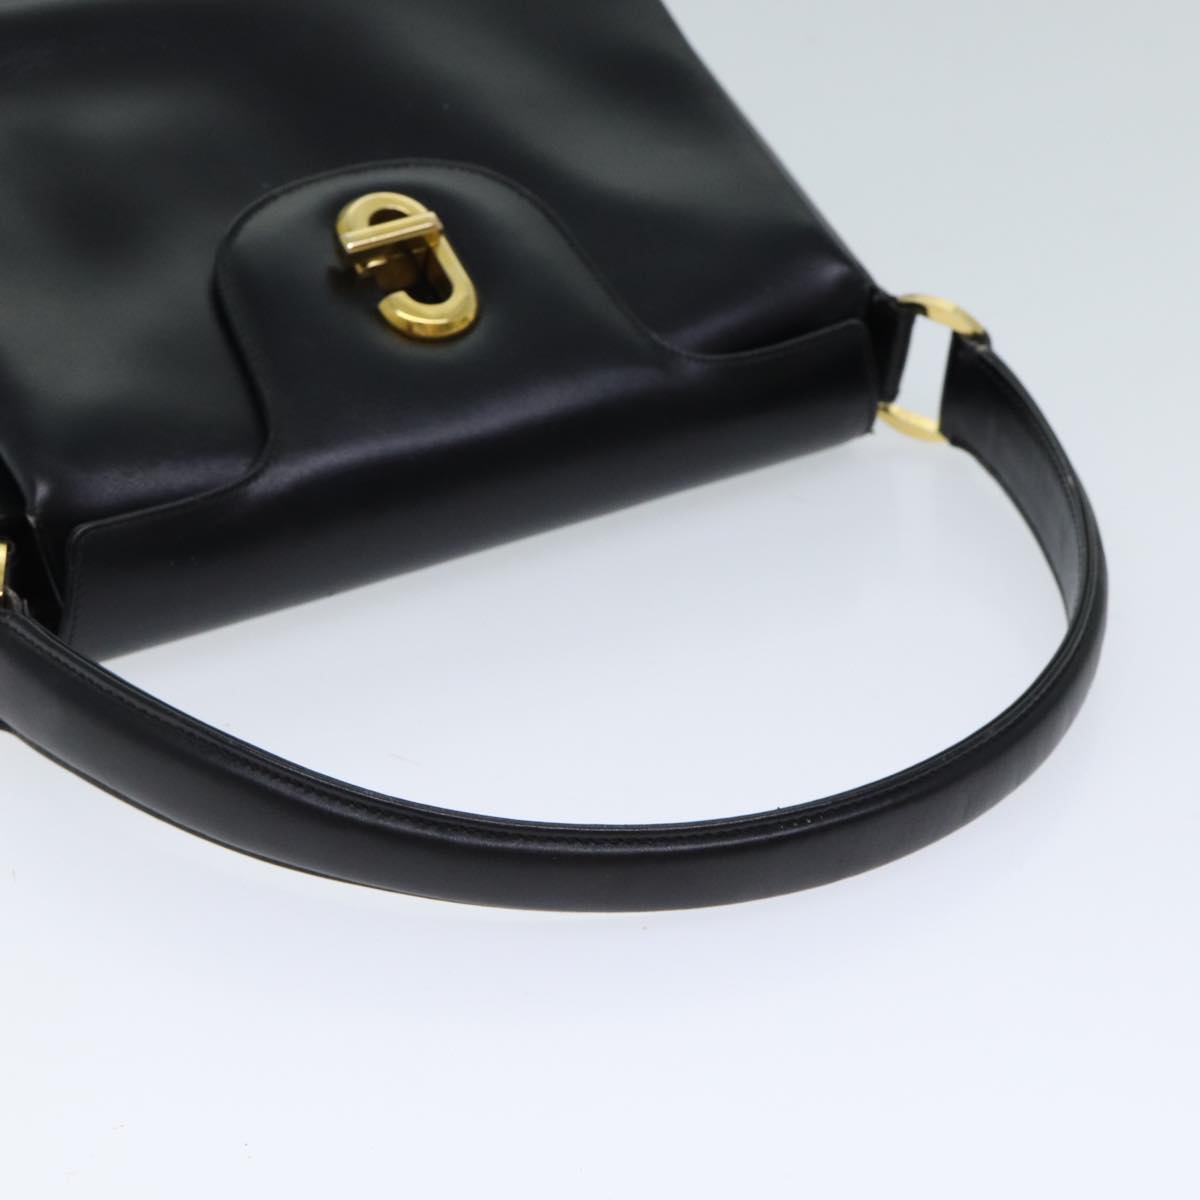 GUCCI Hand Bag Leather Black 000 406 1080 Auth 72690